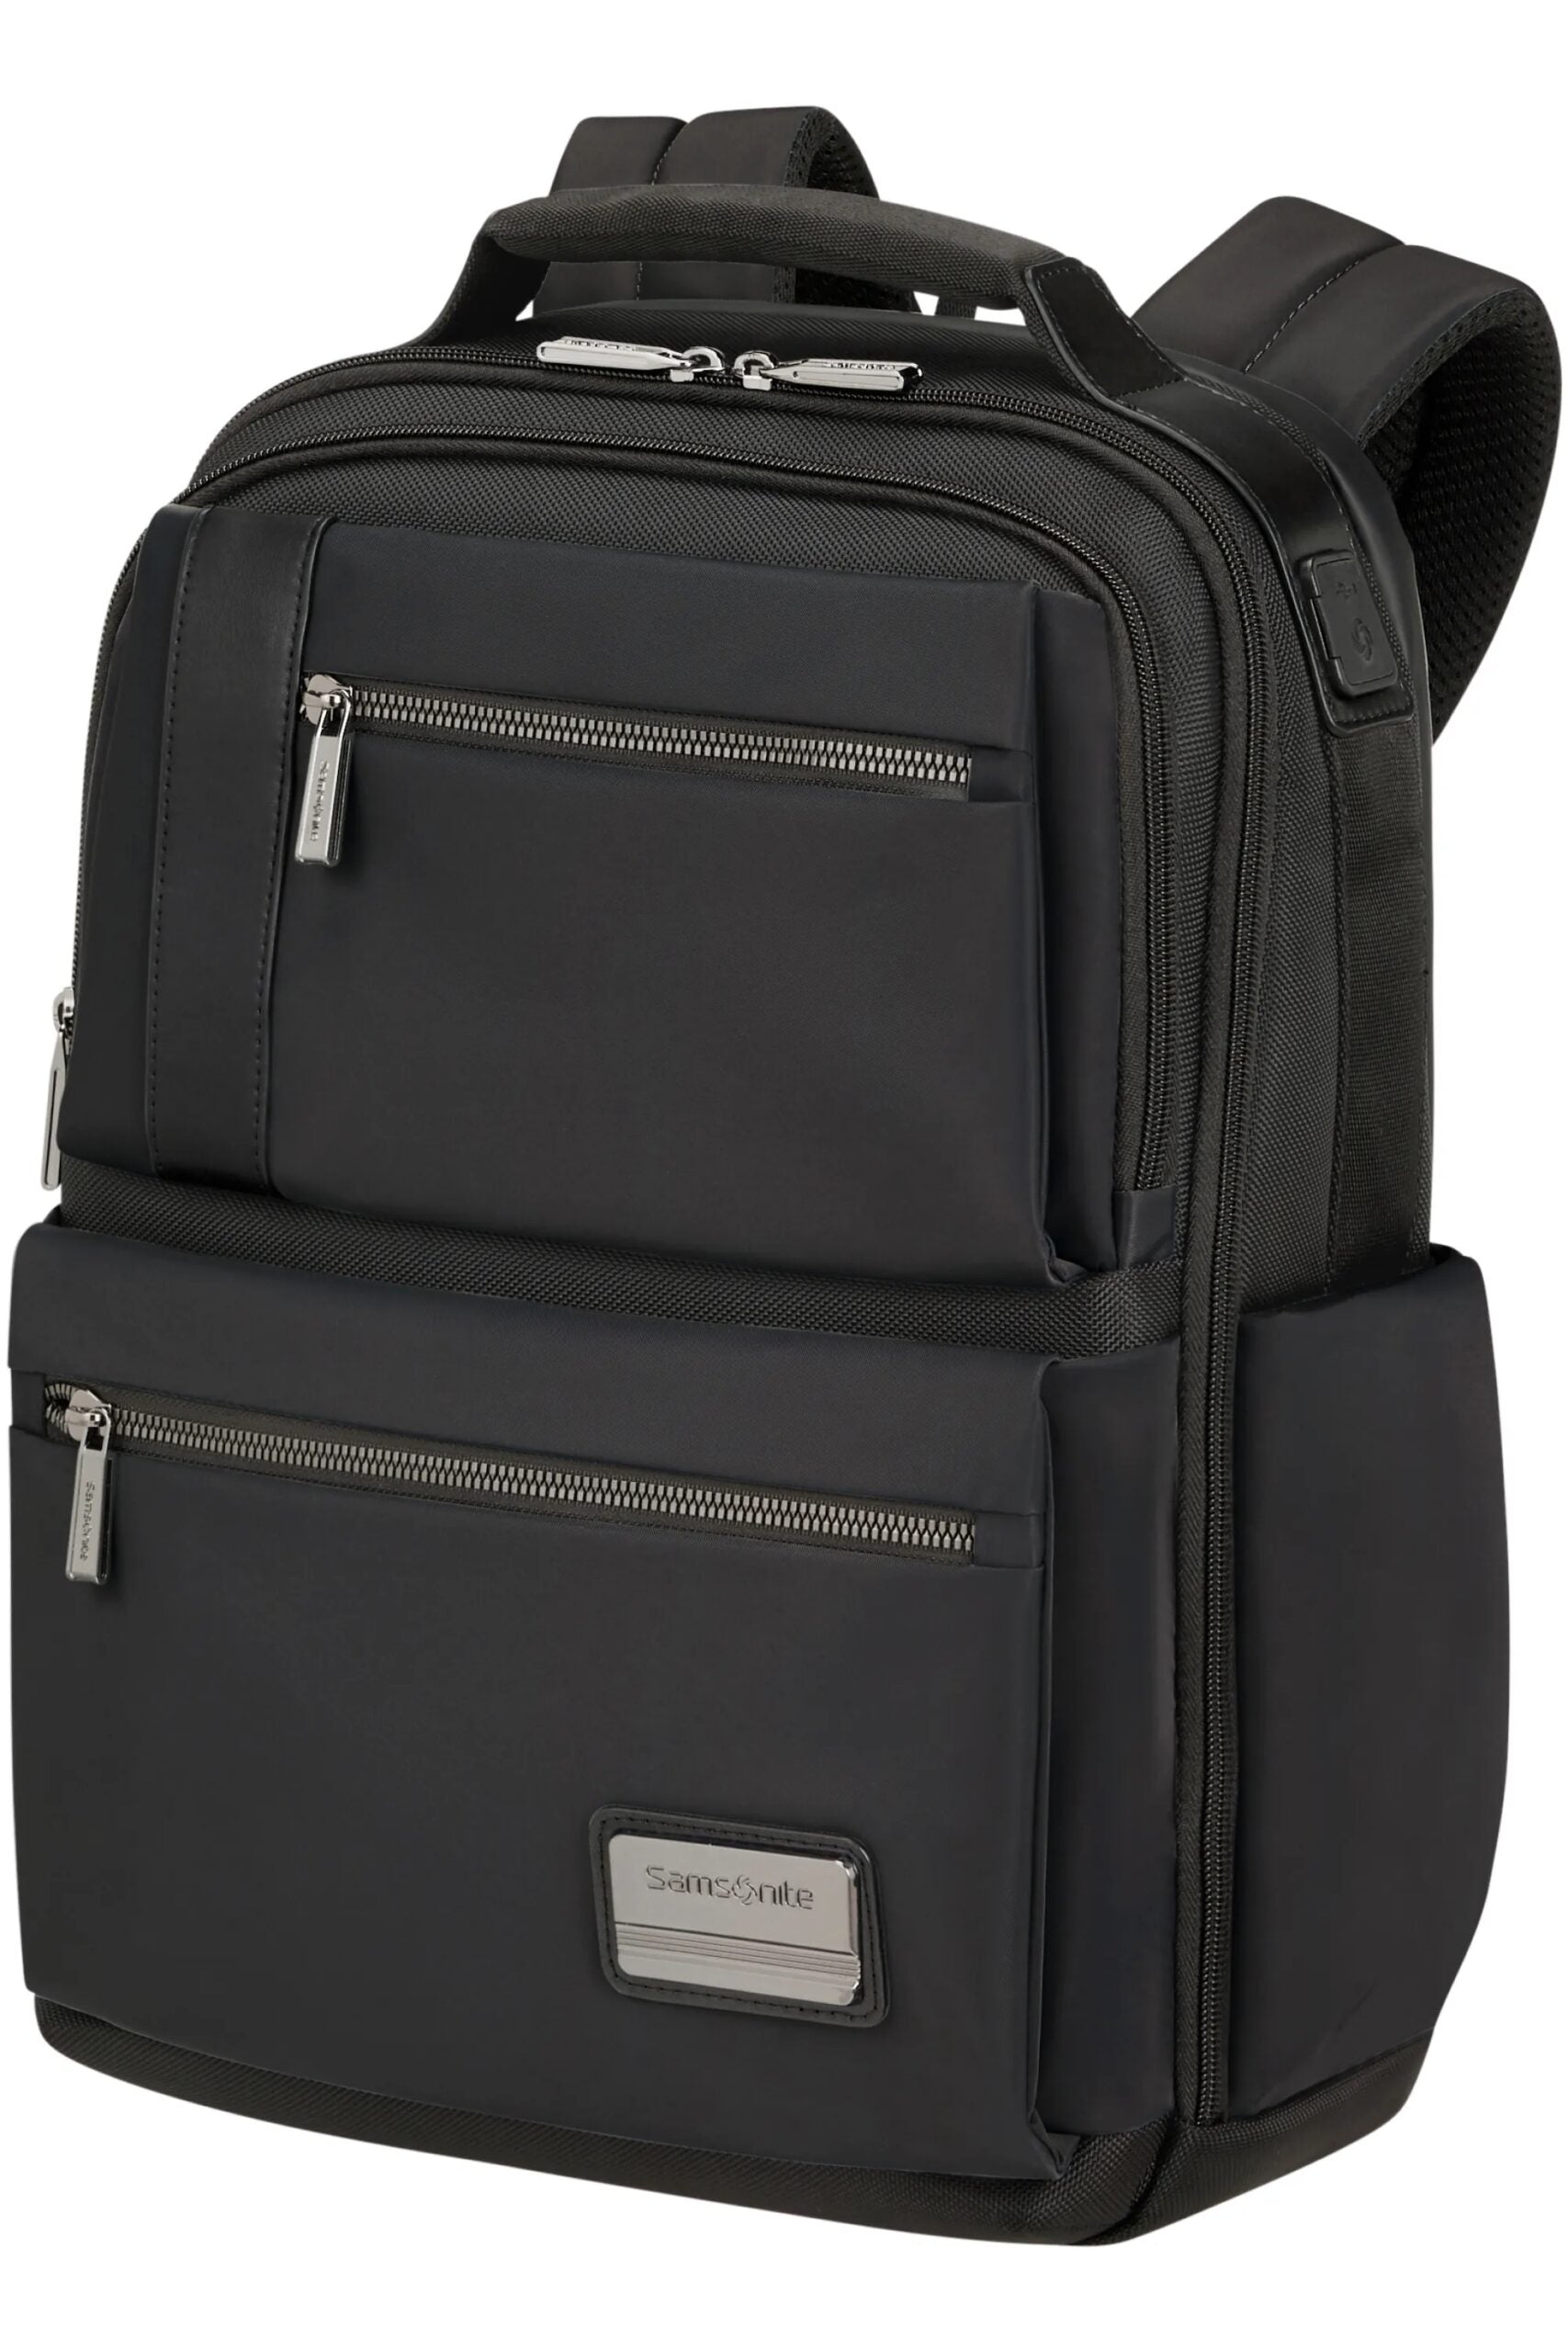 Openroad backpack 14.1 2